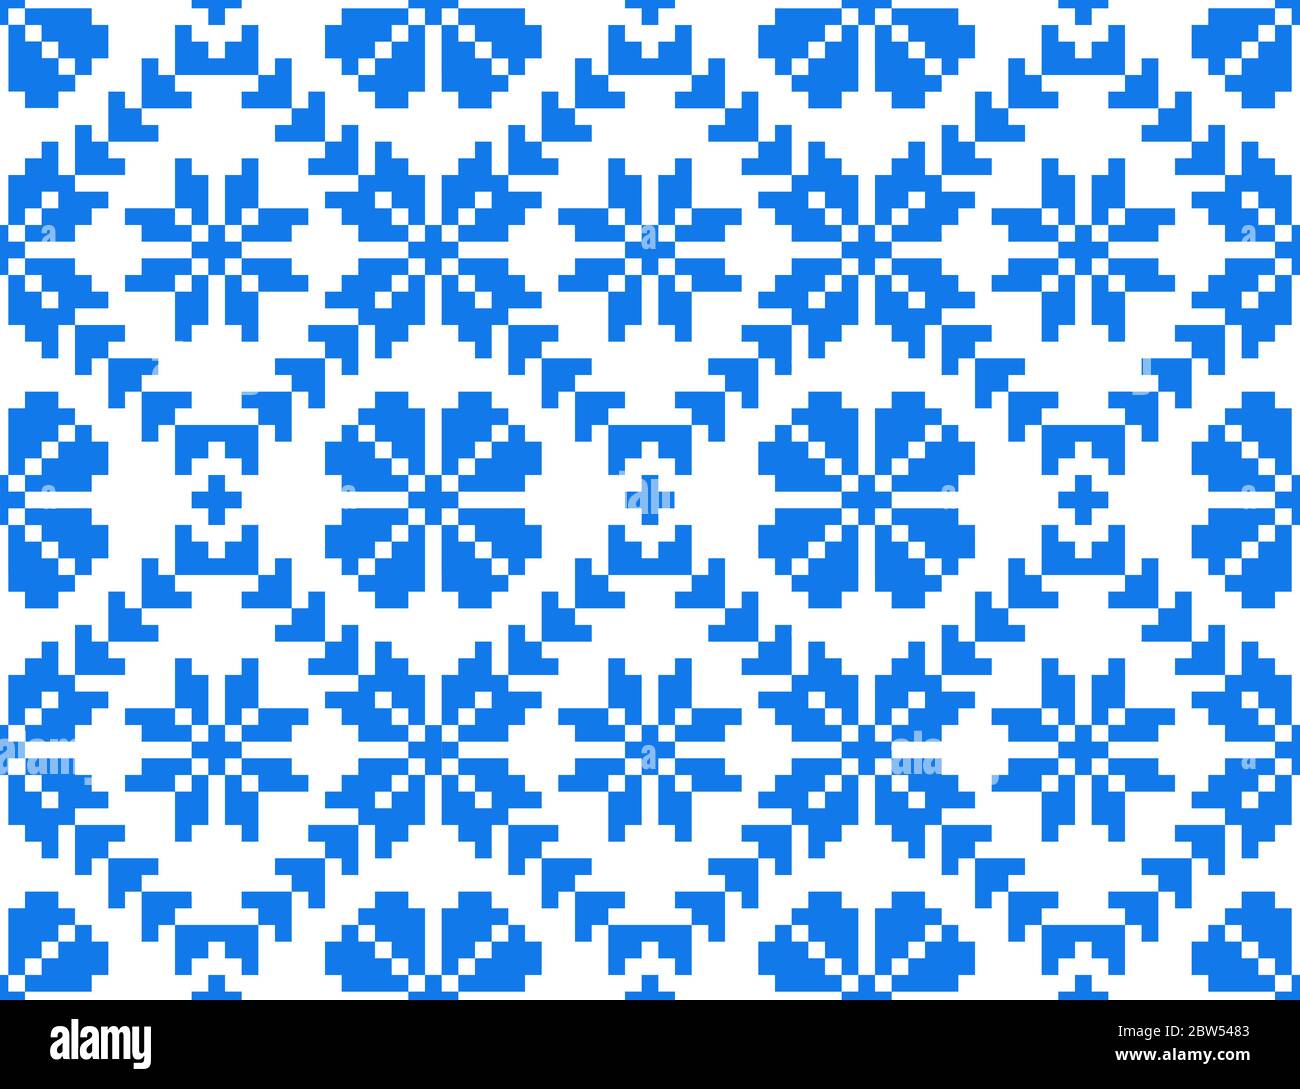 Folk Art seamless repeat pattern design with blue floral elements on white background. Eastern European traditional embroidery pattern. Transylvania Stock Vector